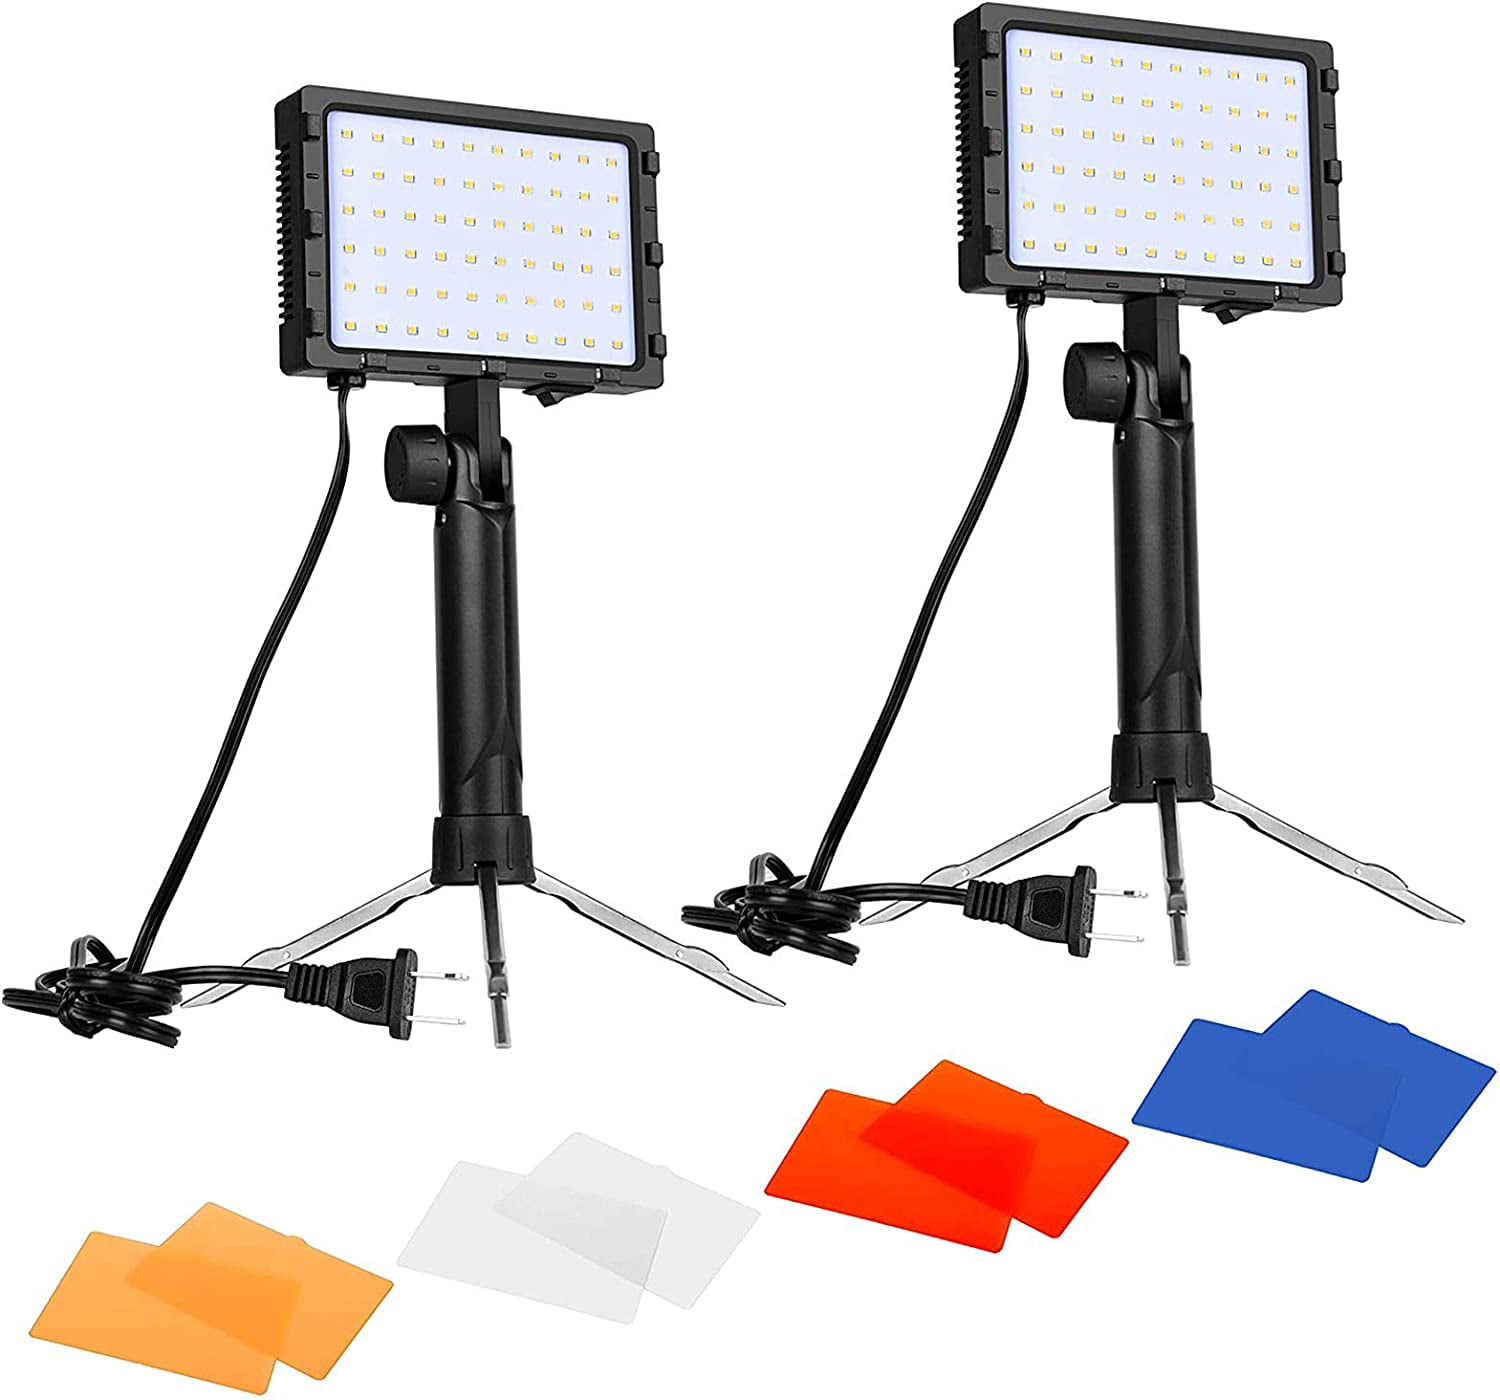 Finde sig i Tal til salut EMART 60 LED Continuous Portable Photography Lighting Kit for Table Top  Photo Video Studio Light Lamp with Color Filters - 2 Packs - Walmart.com